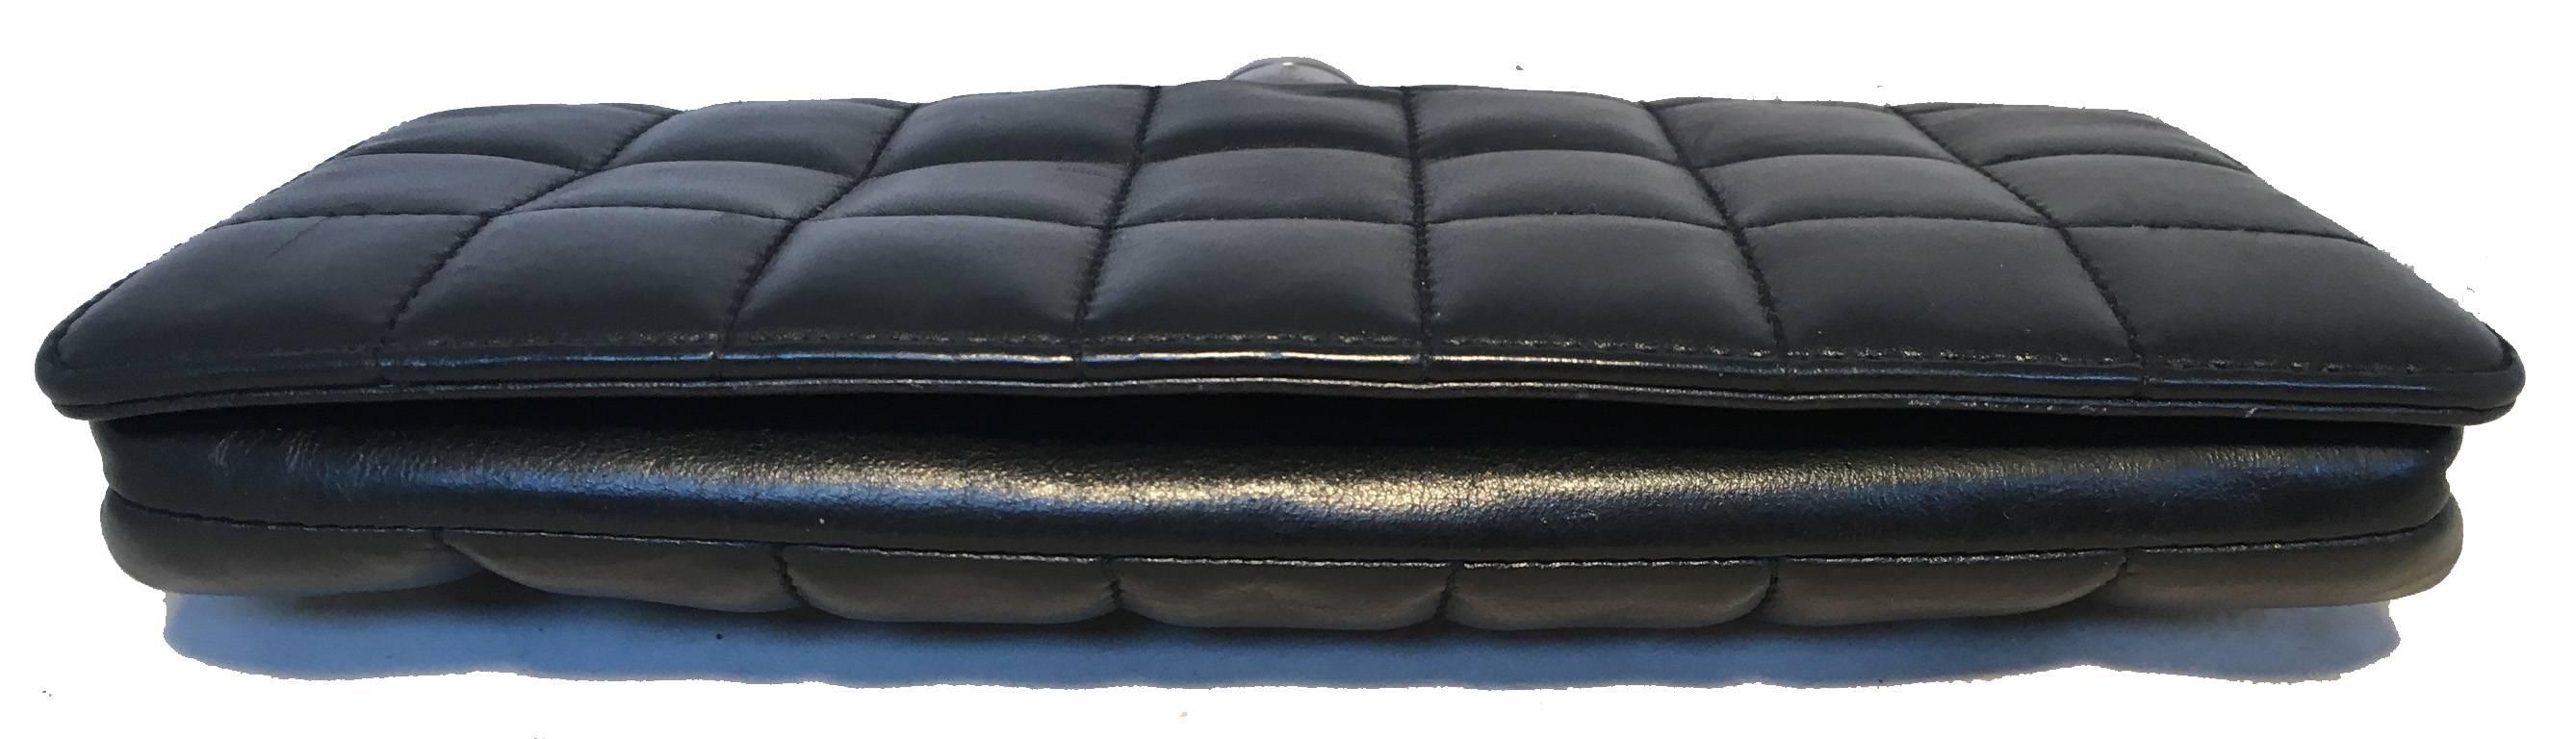 Women's RARE Chanel Square Quilted Black Leather Crystal Ball Top Clutch